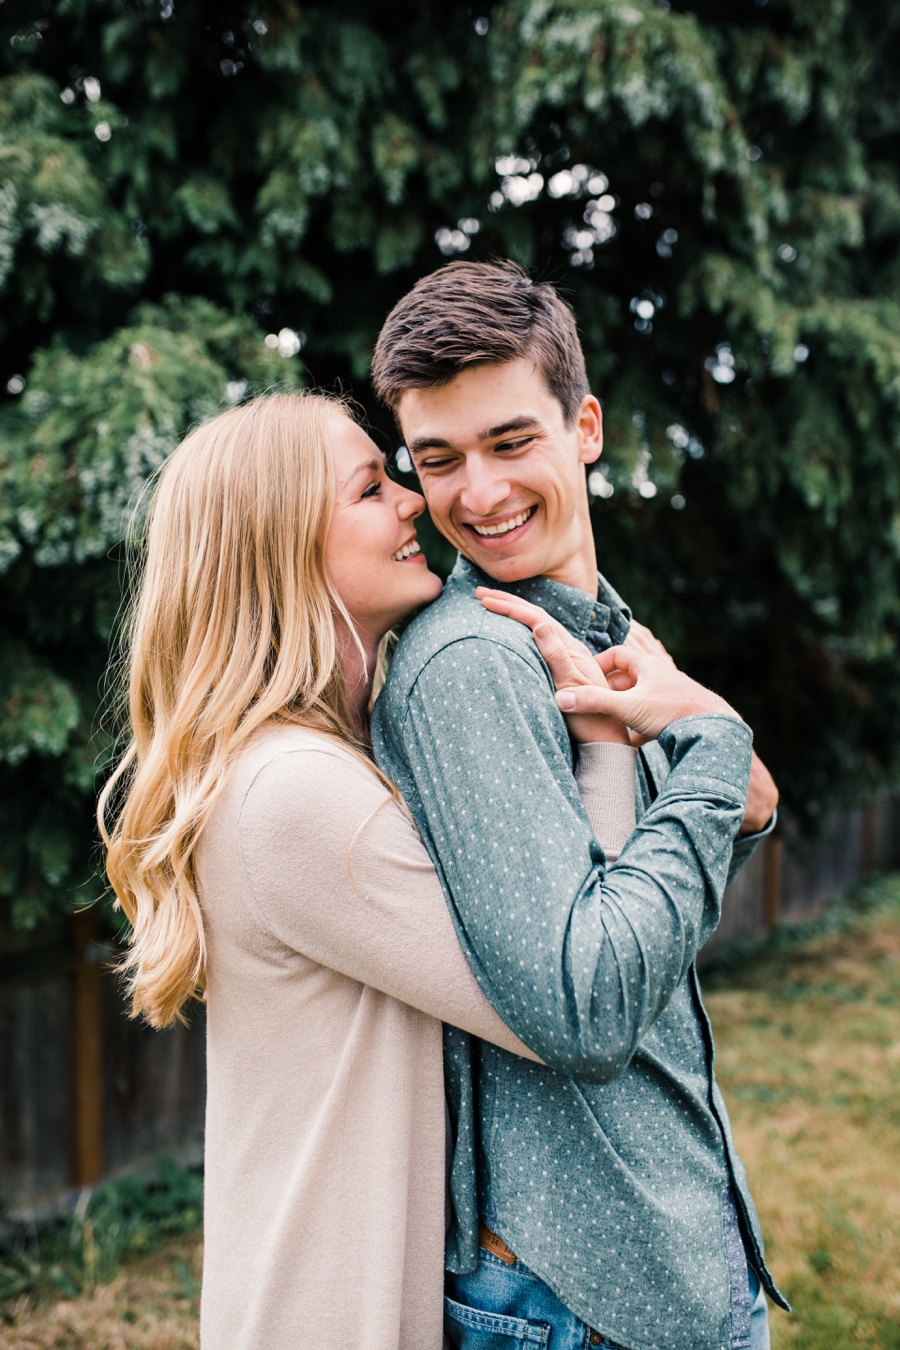 Lincoln Park Engagement Photos in West Seattle by Seattle Engagement Photographer Amy Galbraith